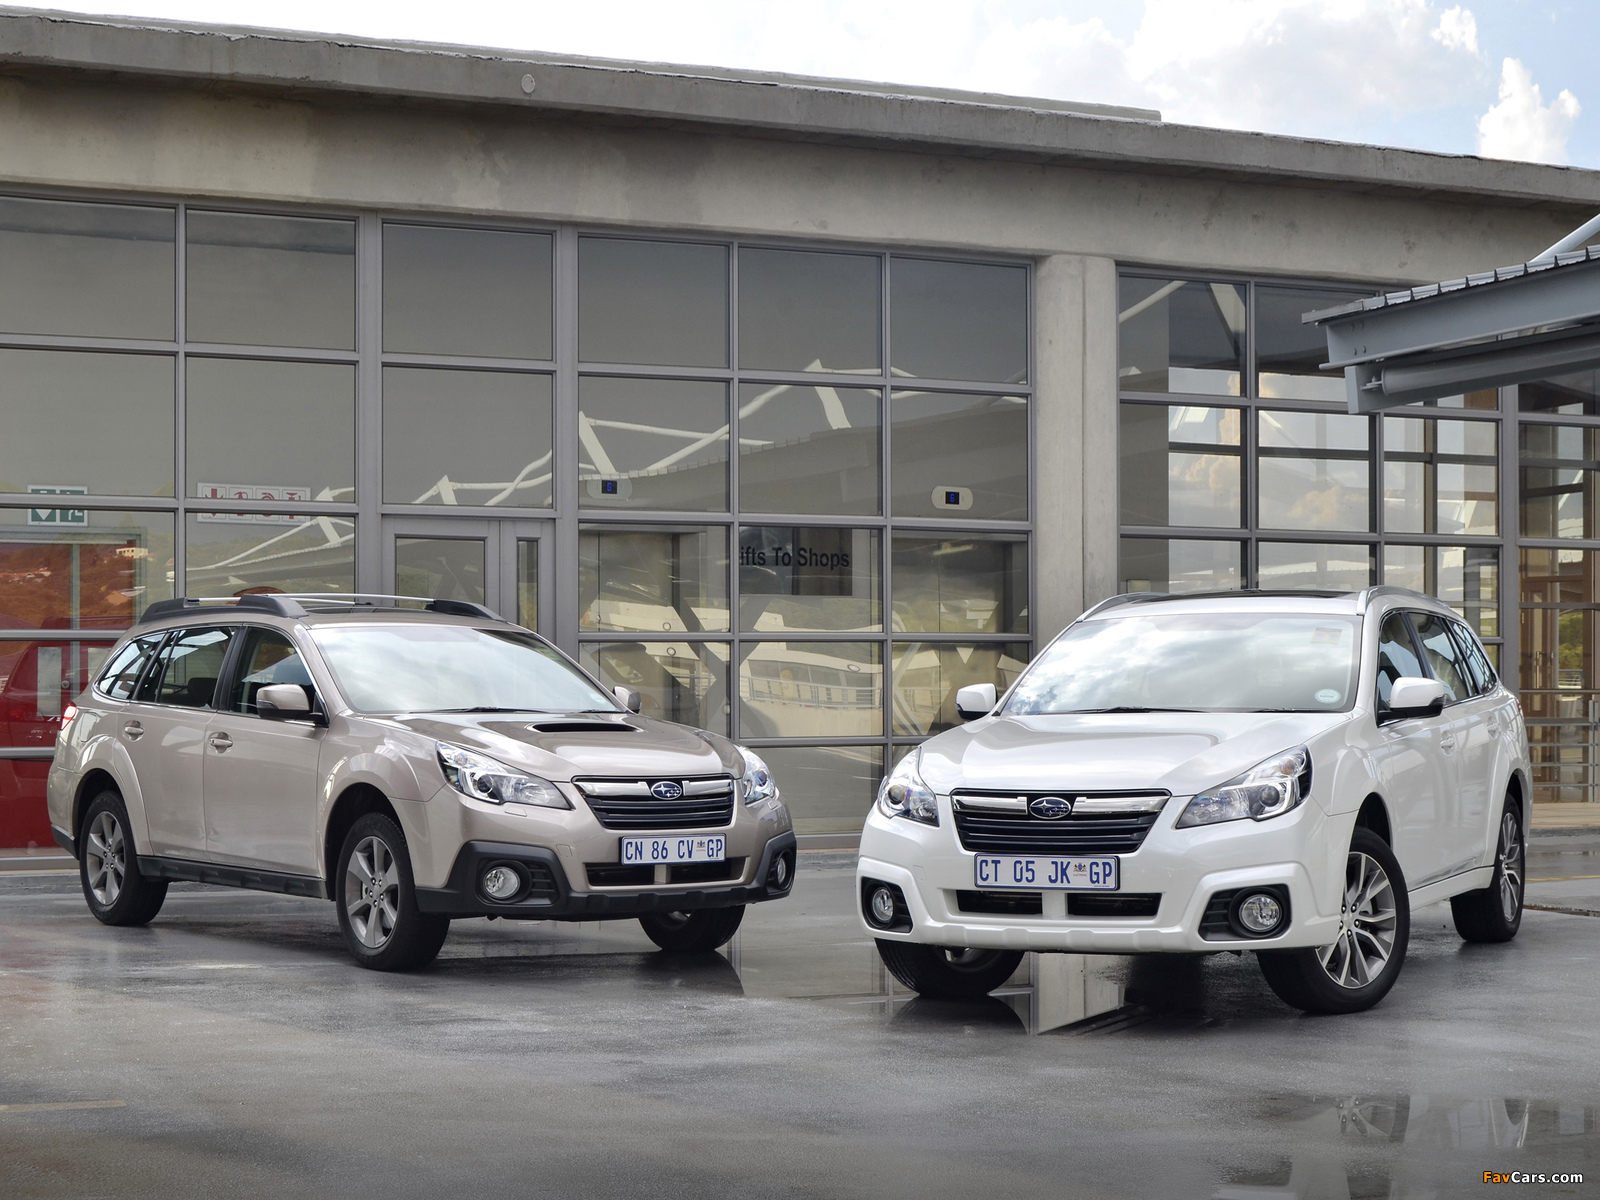 Images of Subaru Outback (1600 x 1200)